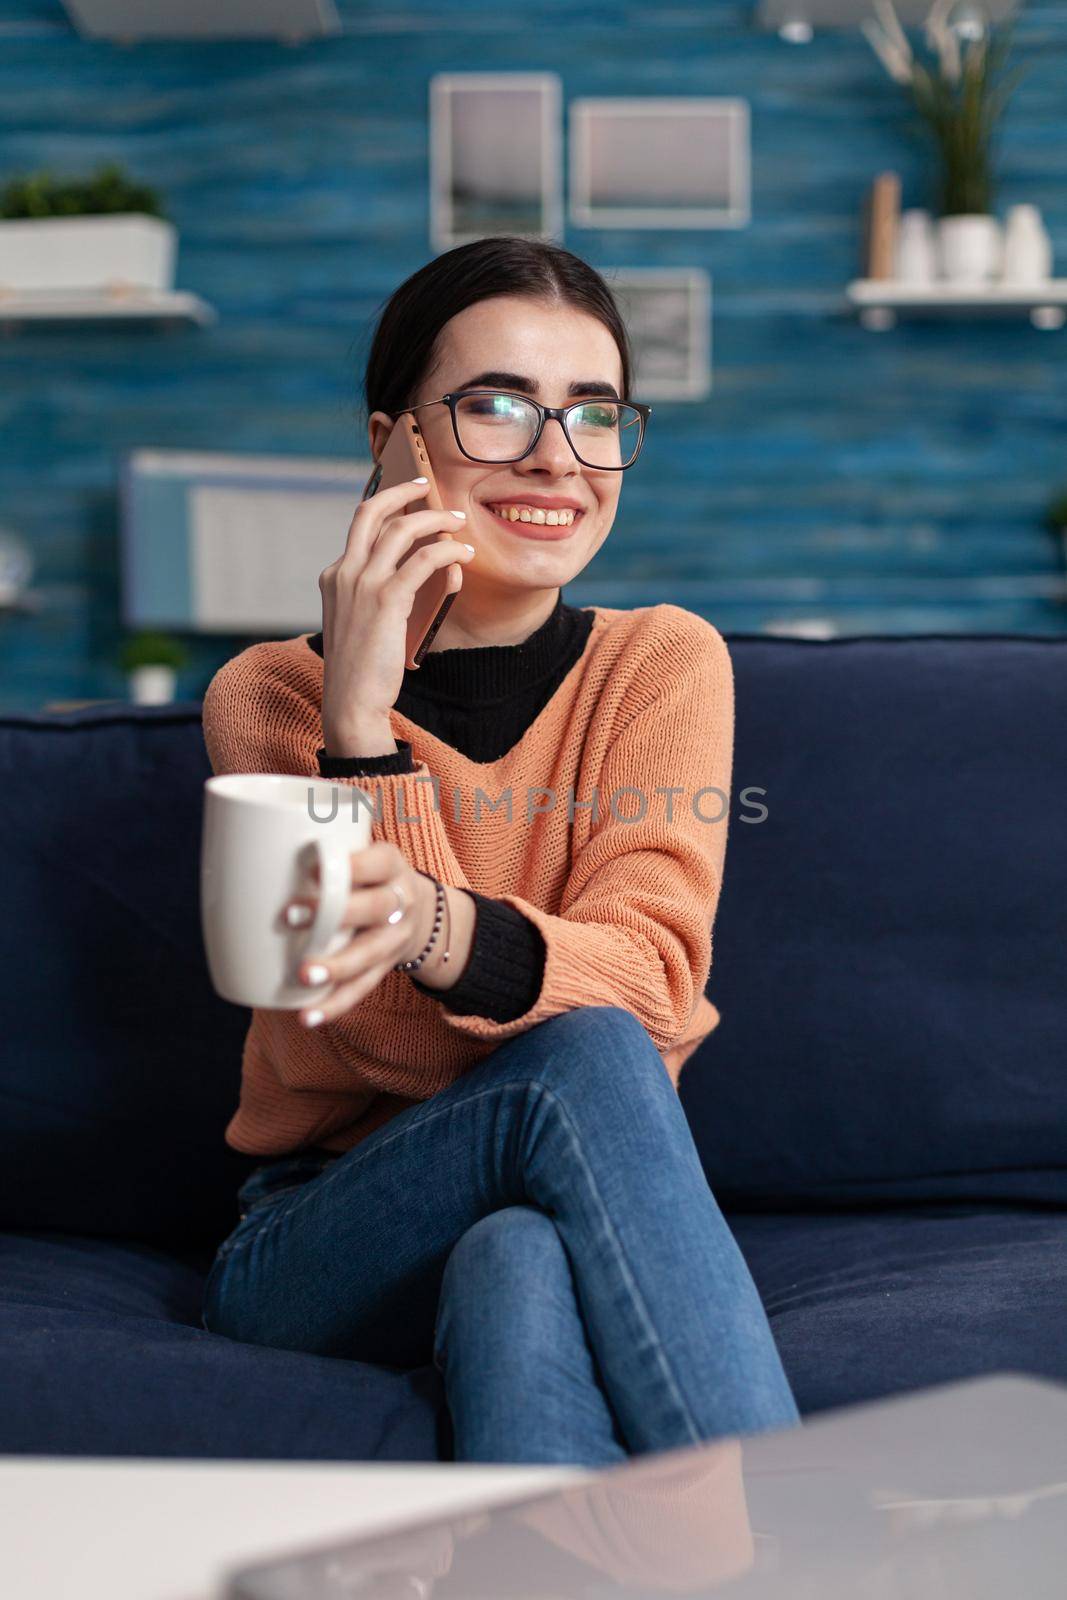 Portrait of teenager talking about lifestyle on modern smartphone while laughing with her friend sitting on couch in living room. Young woman having fun during funny lifestyle conversation call